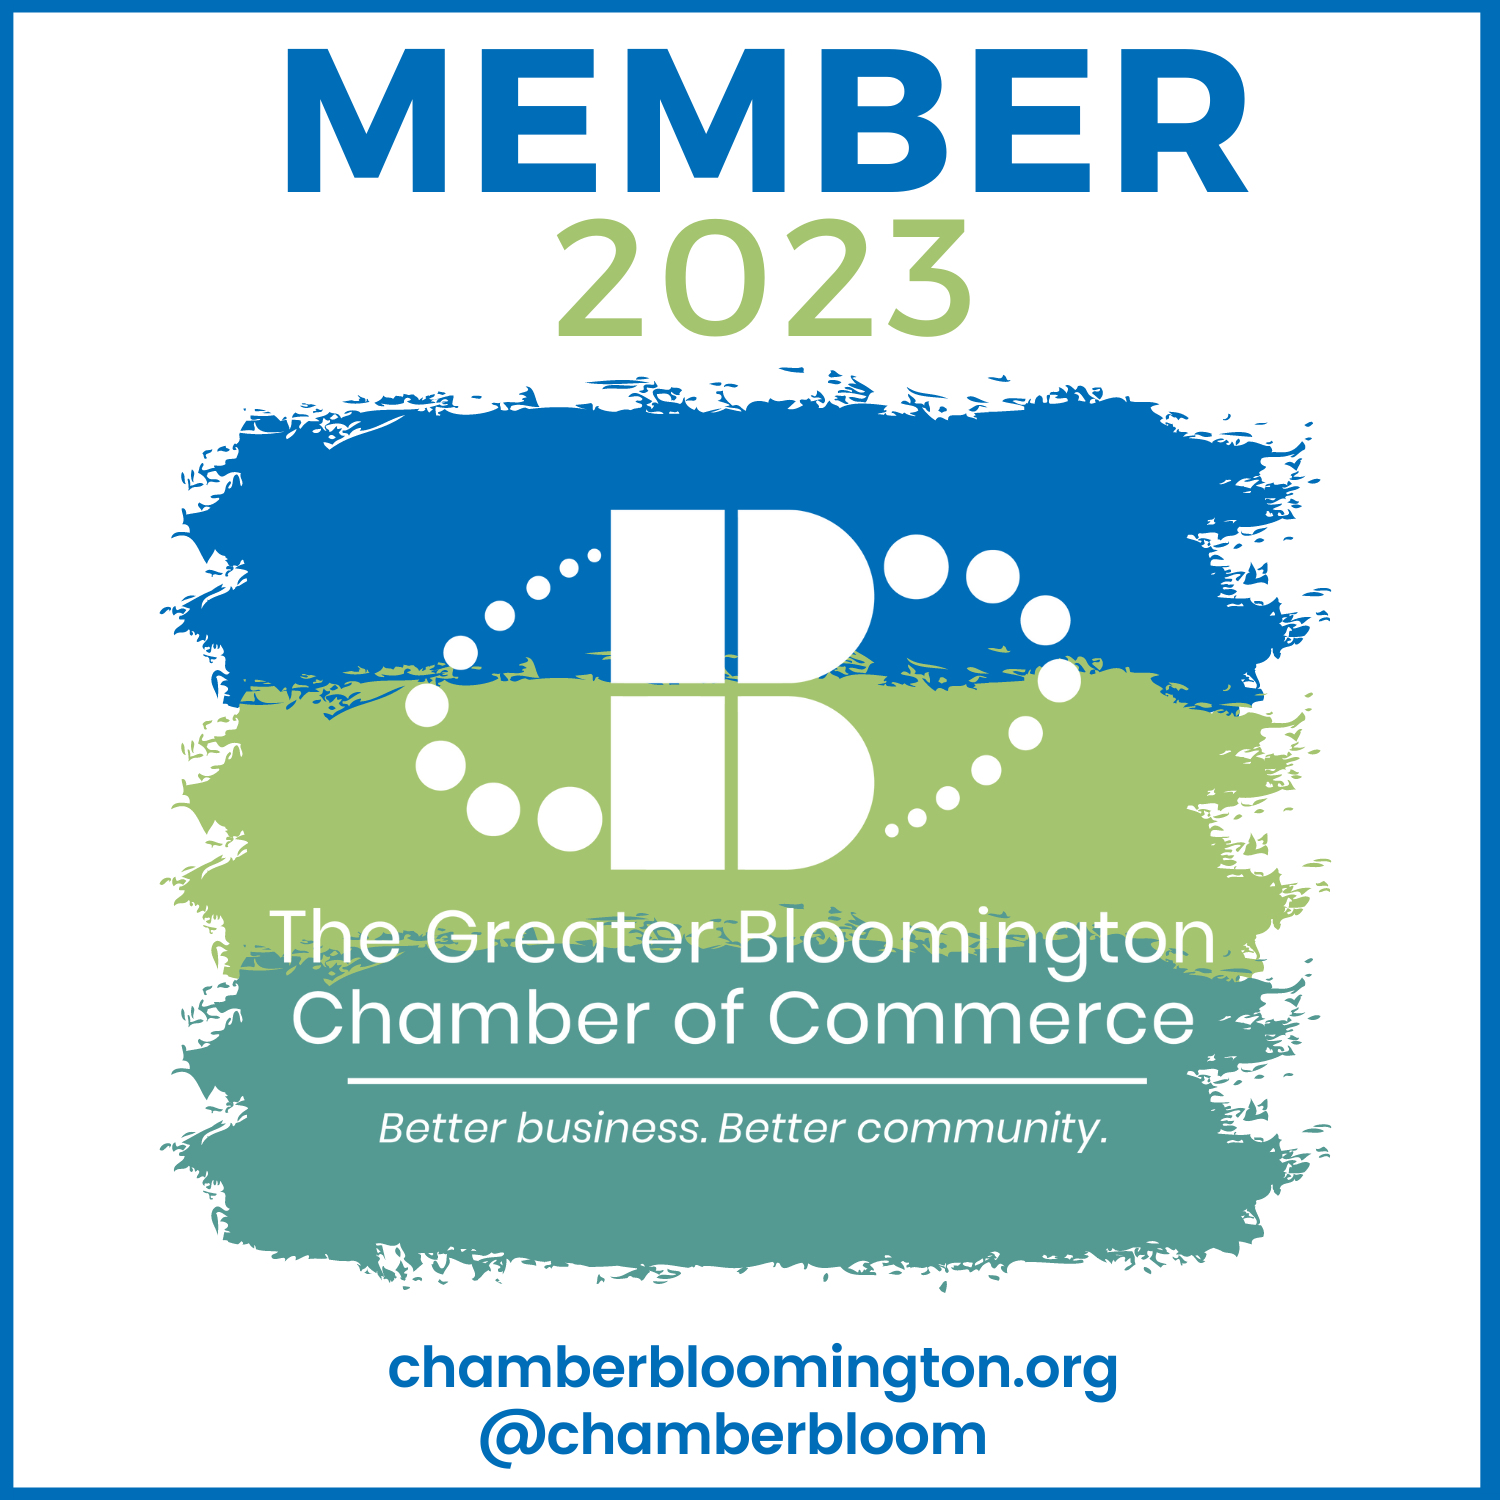 2023 Member of the Greater Bloomington Chamber of Commerce